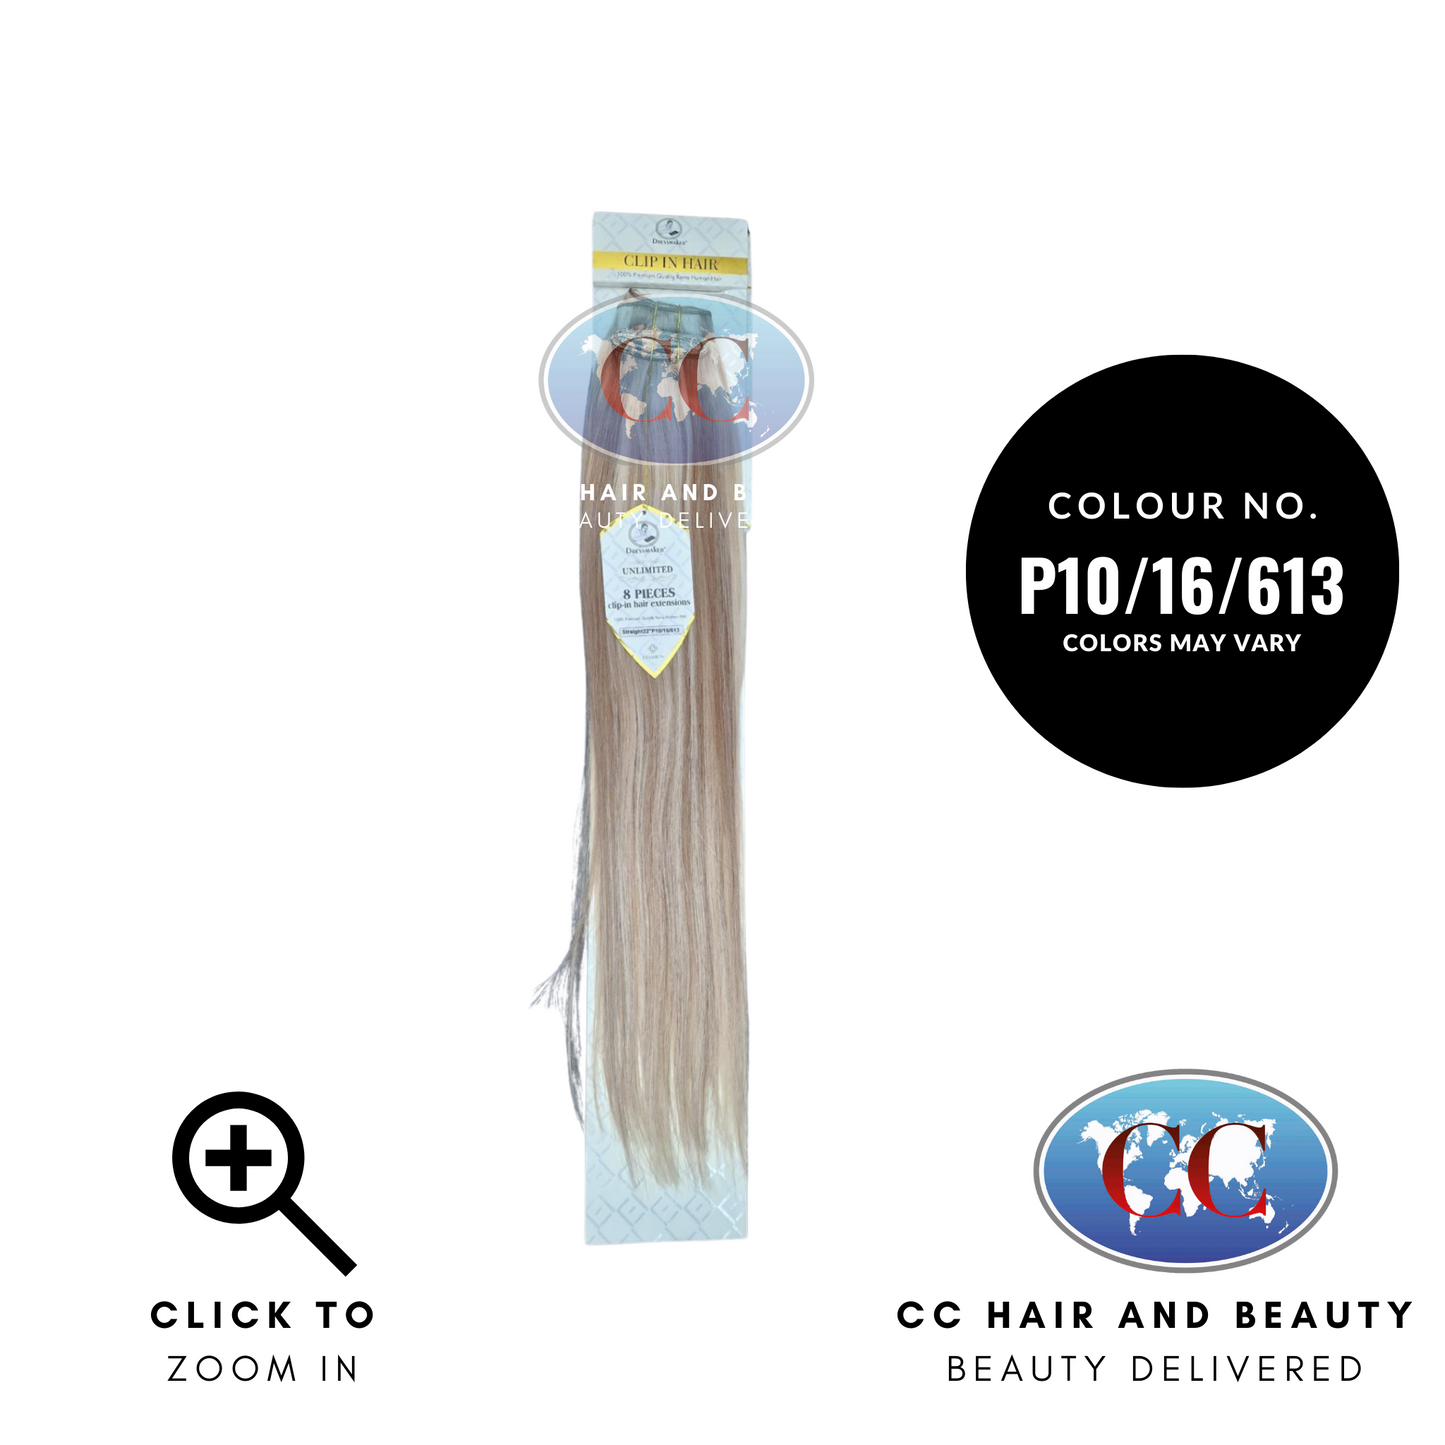 Dressmaker Unlimited 8 pcs Clip in Human Hair Extension 14, 18 & 22" - Straight